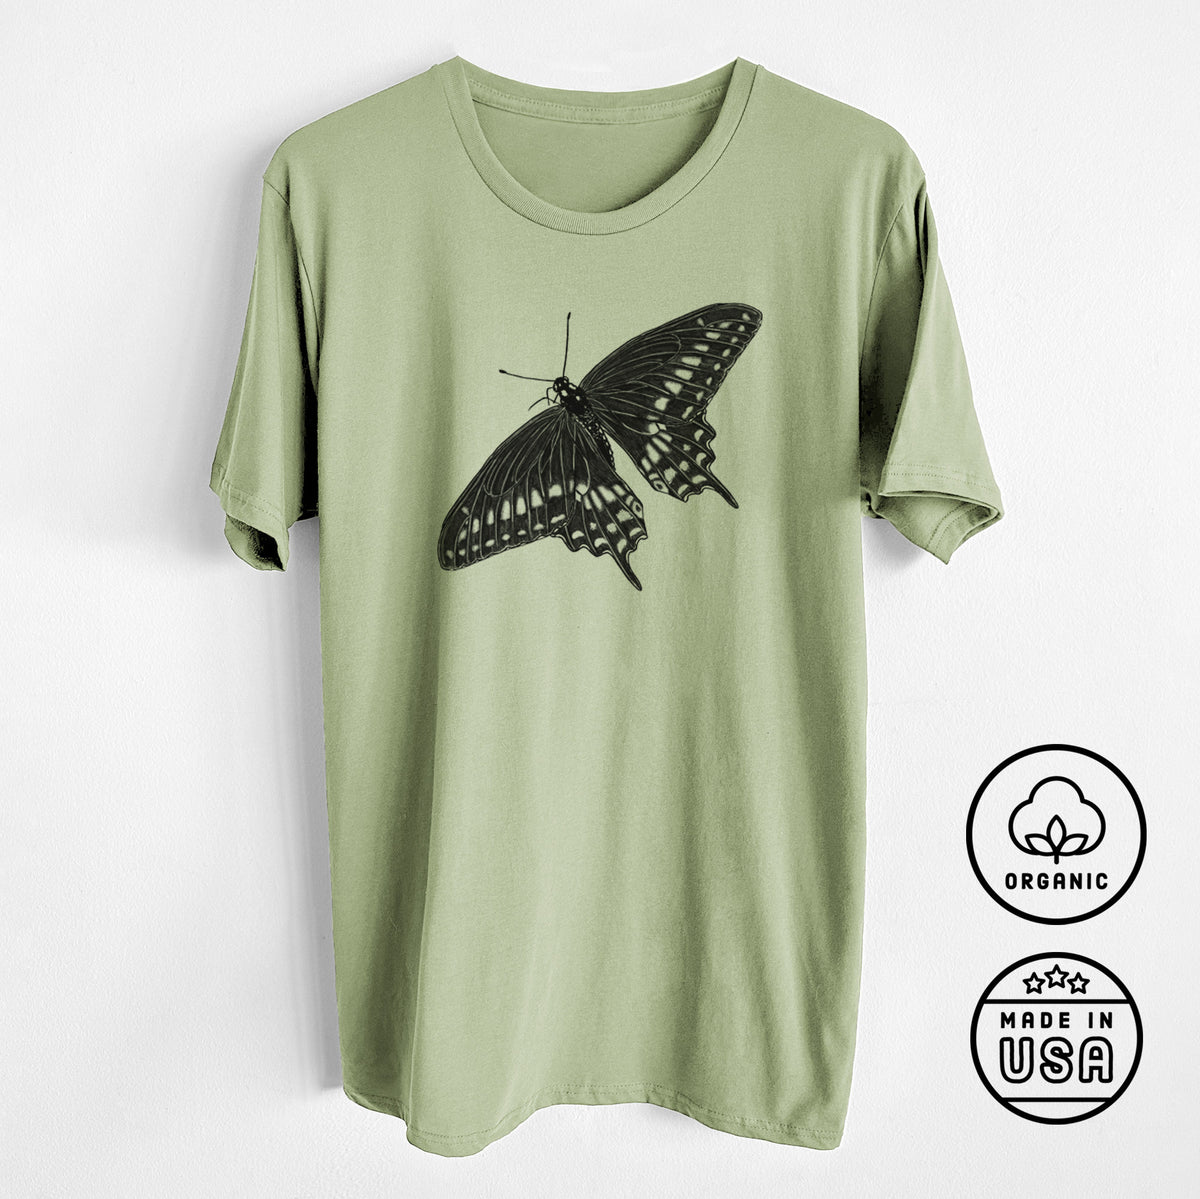 Black Swallowtail Butterfly - Papilio polyxenes - Unisex Crewneck - Made in USA - 100% Organic Cotton